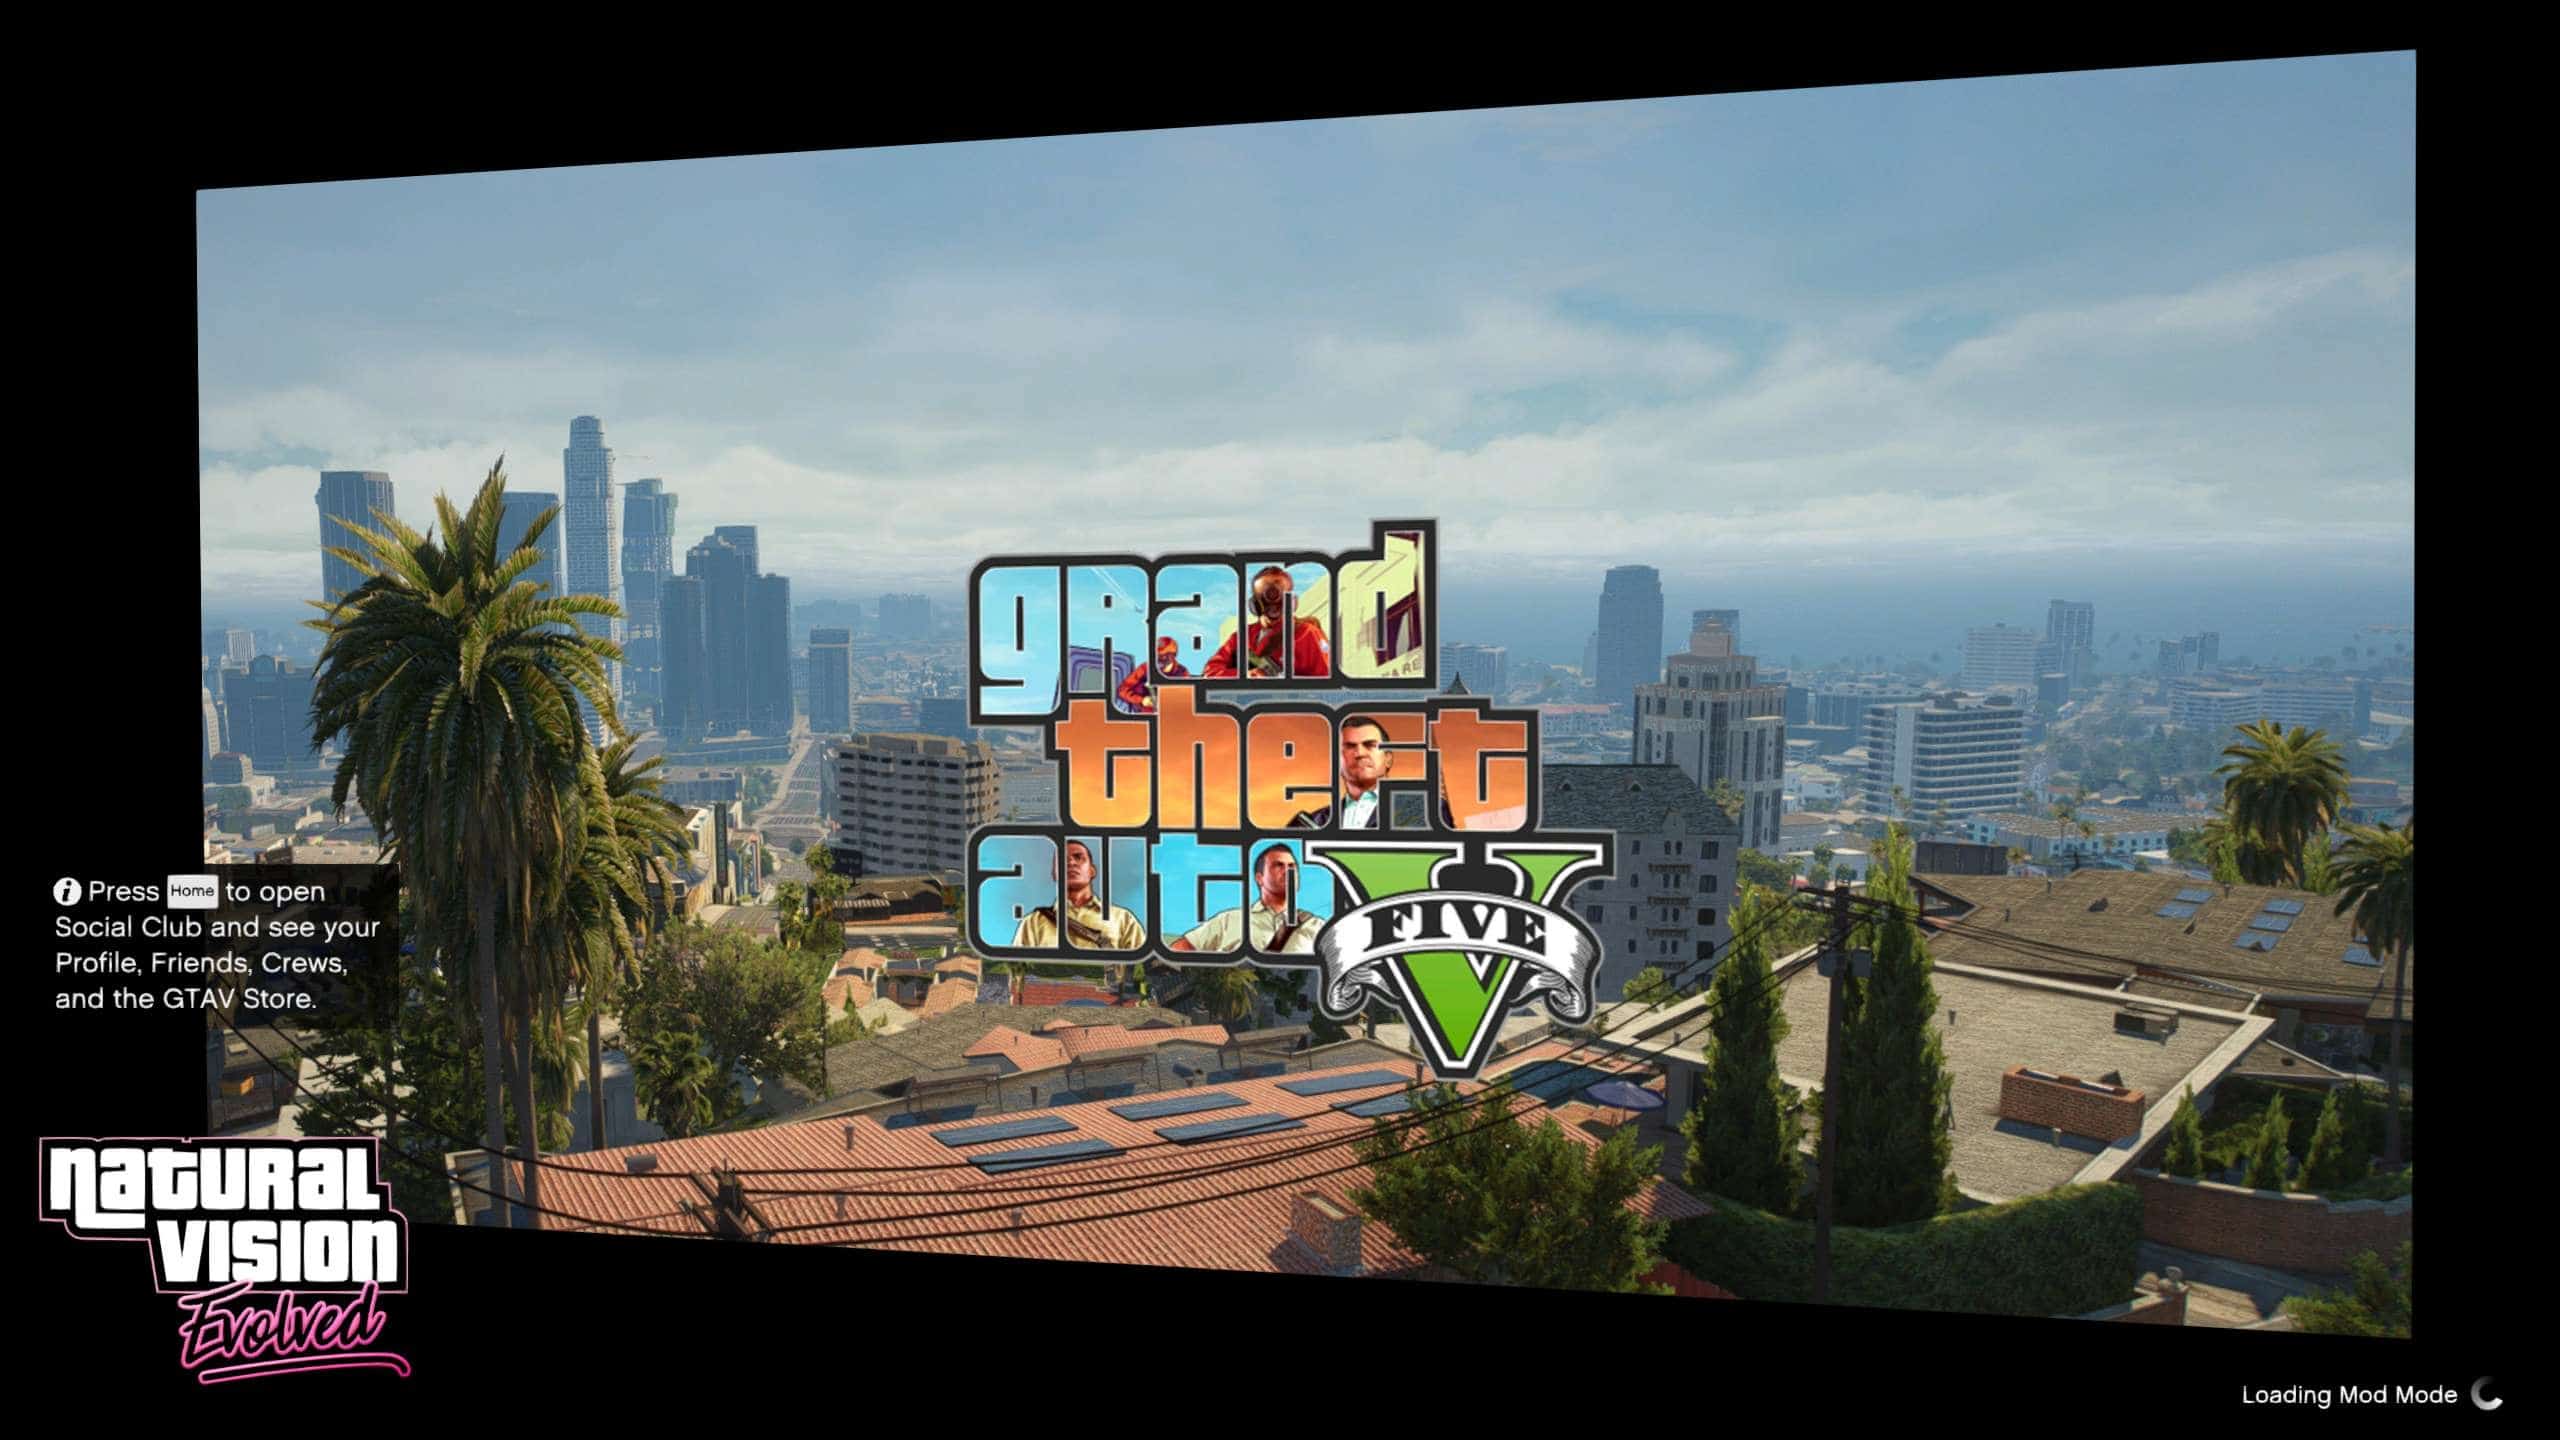 how much is grand theft auto online